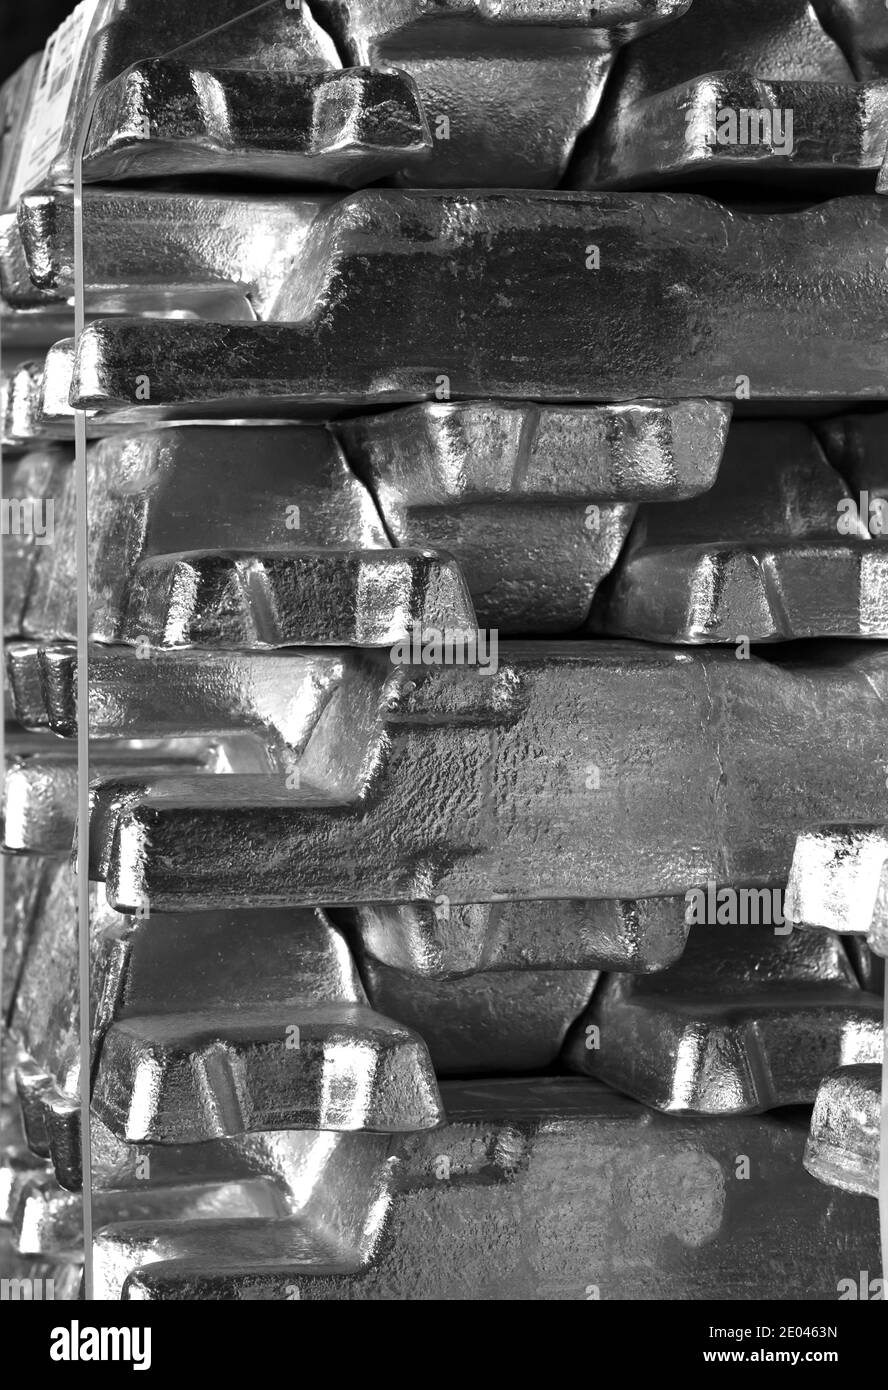 industry background picture of aluminum ingots stacked and stored, black and white photography Stock Photo